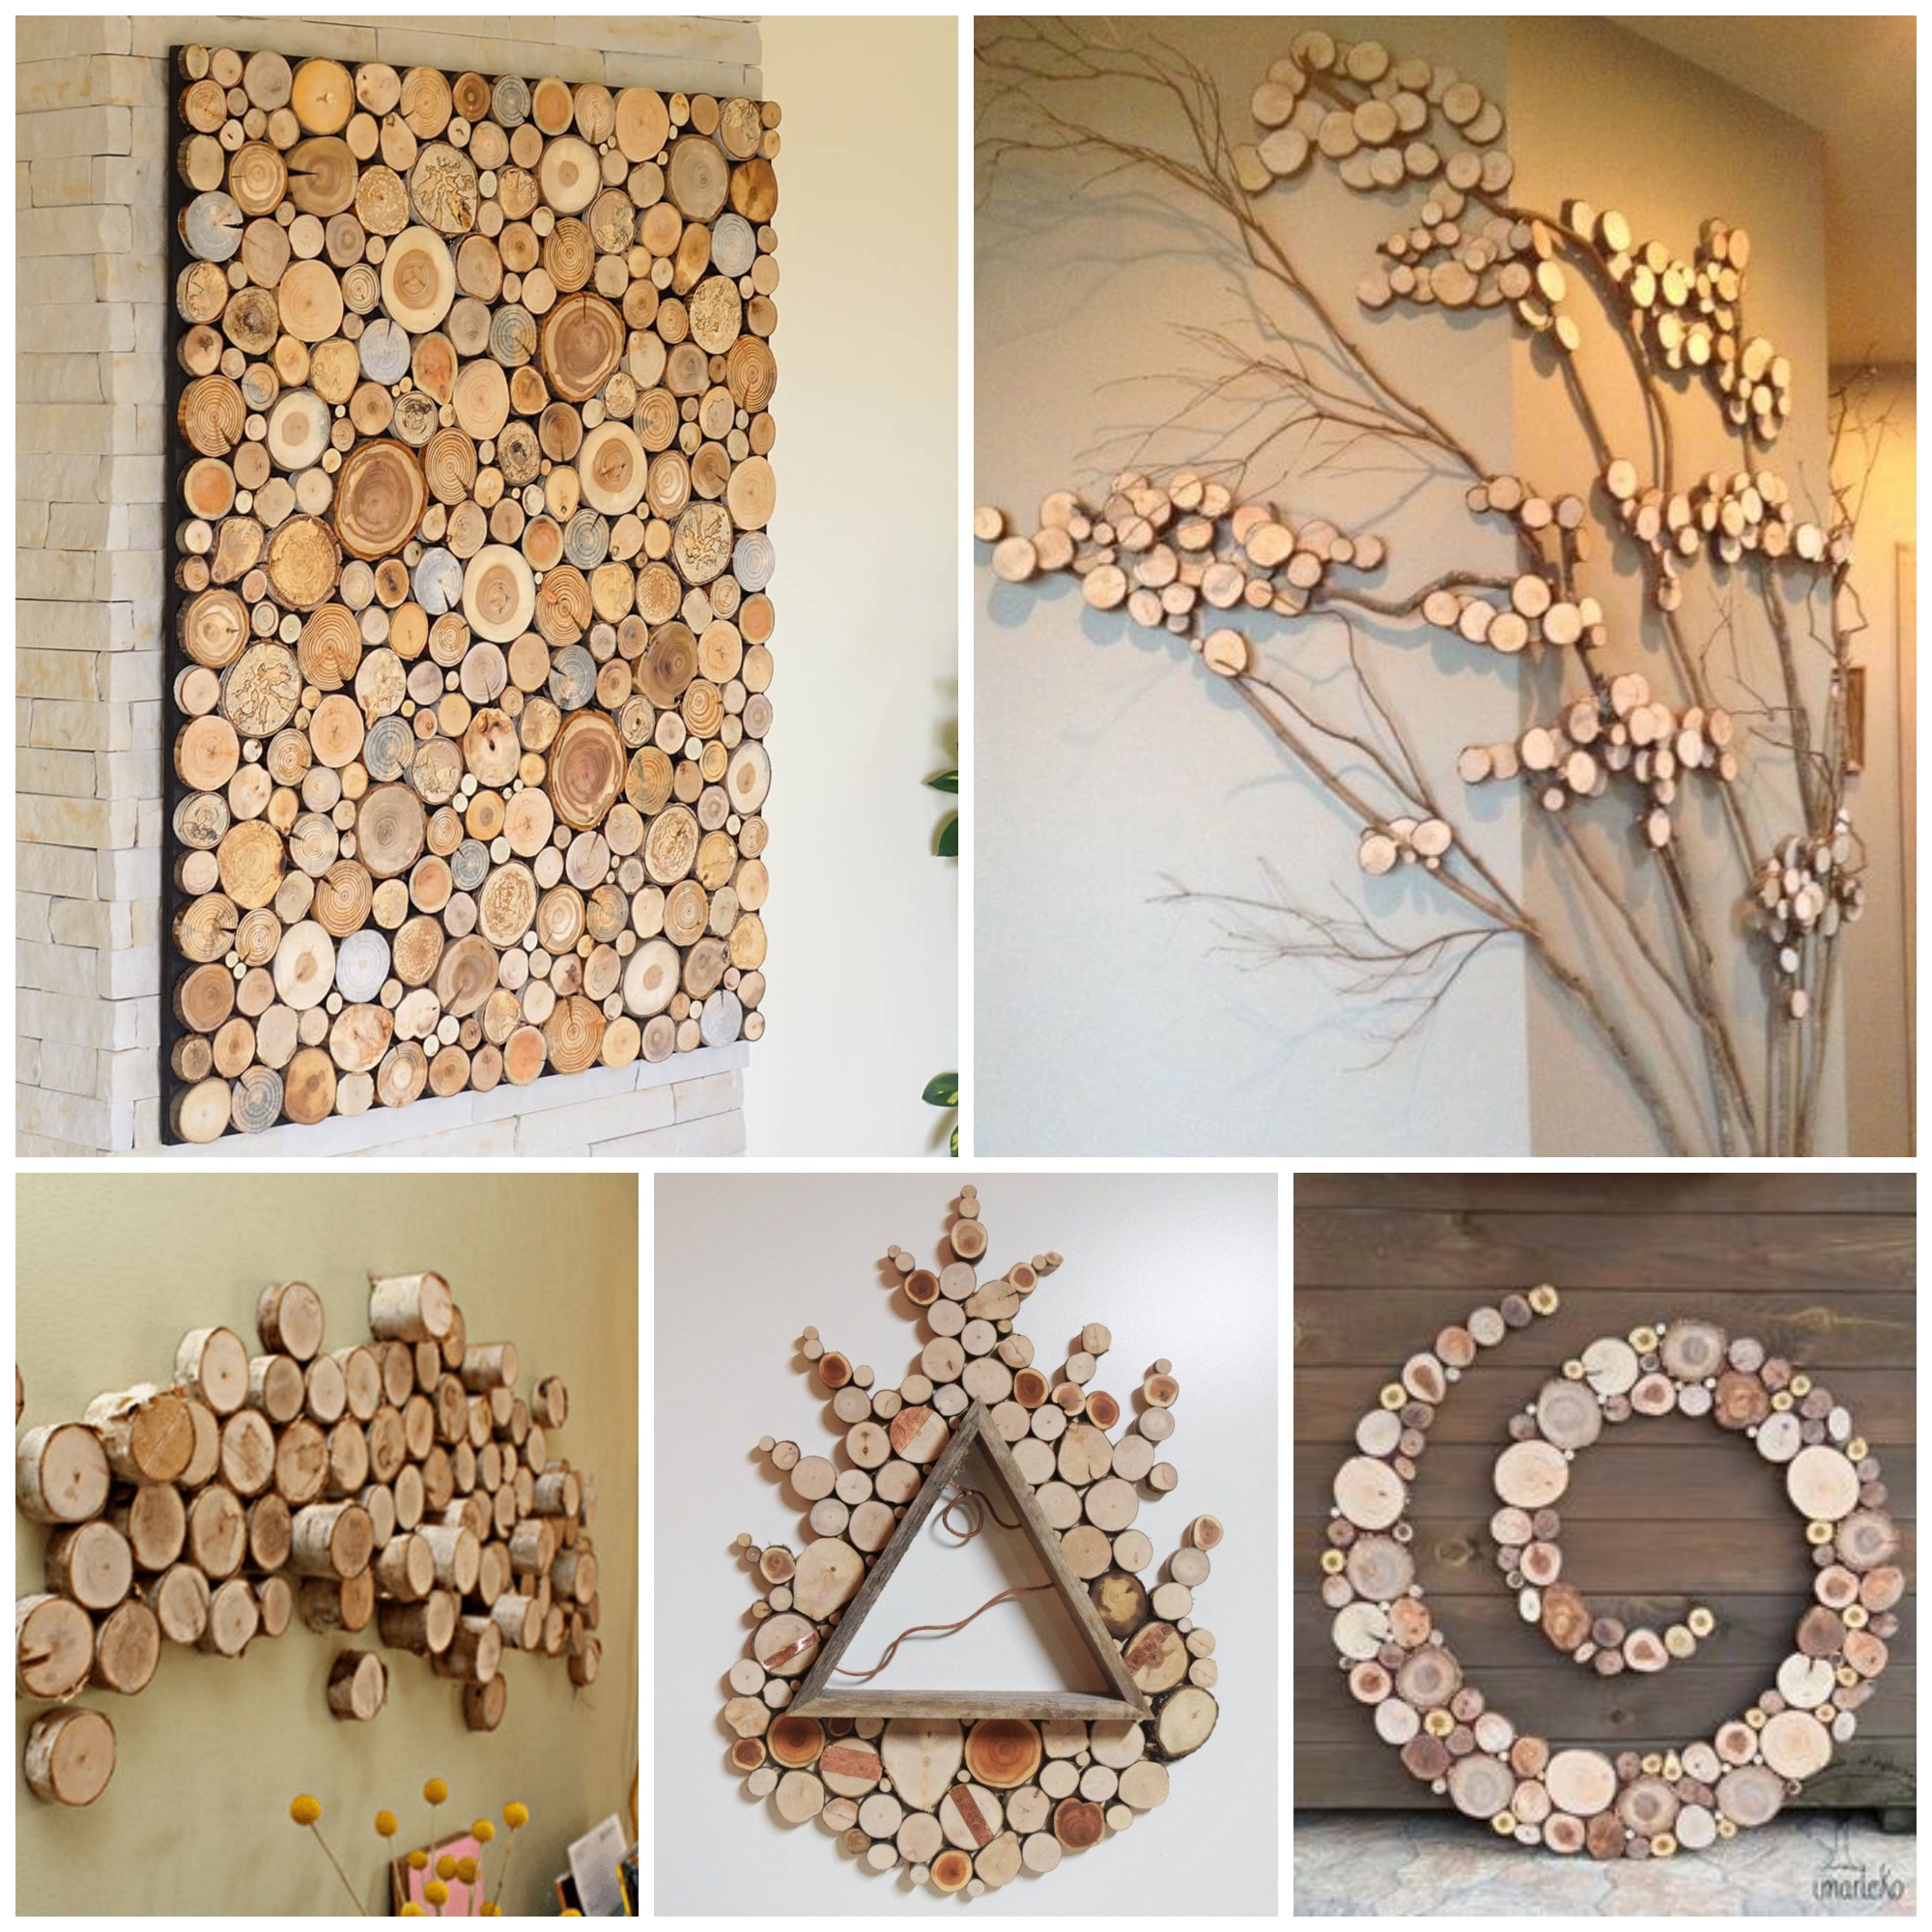 Creative wood slice projects and decorations